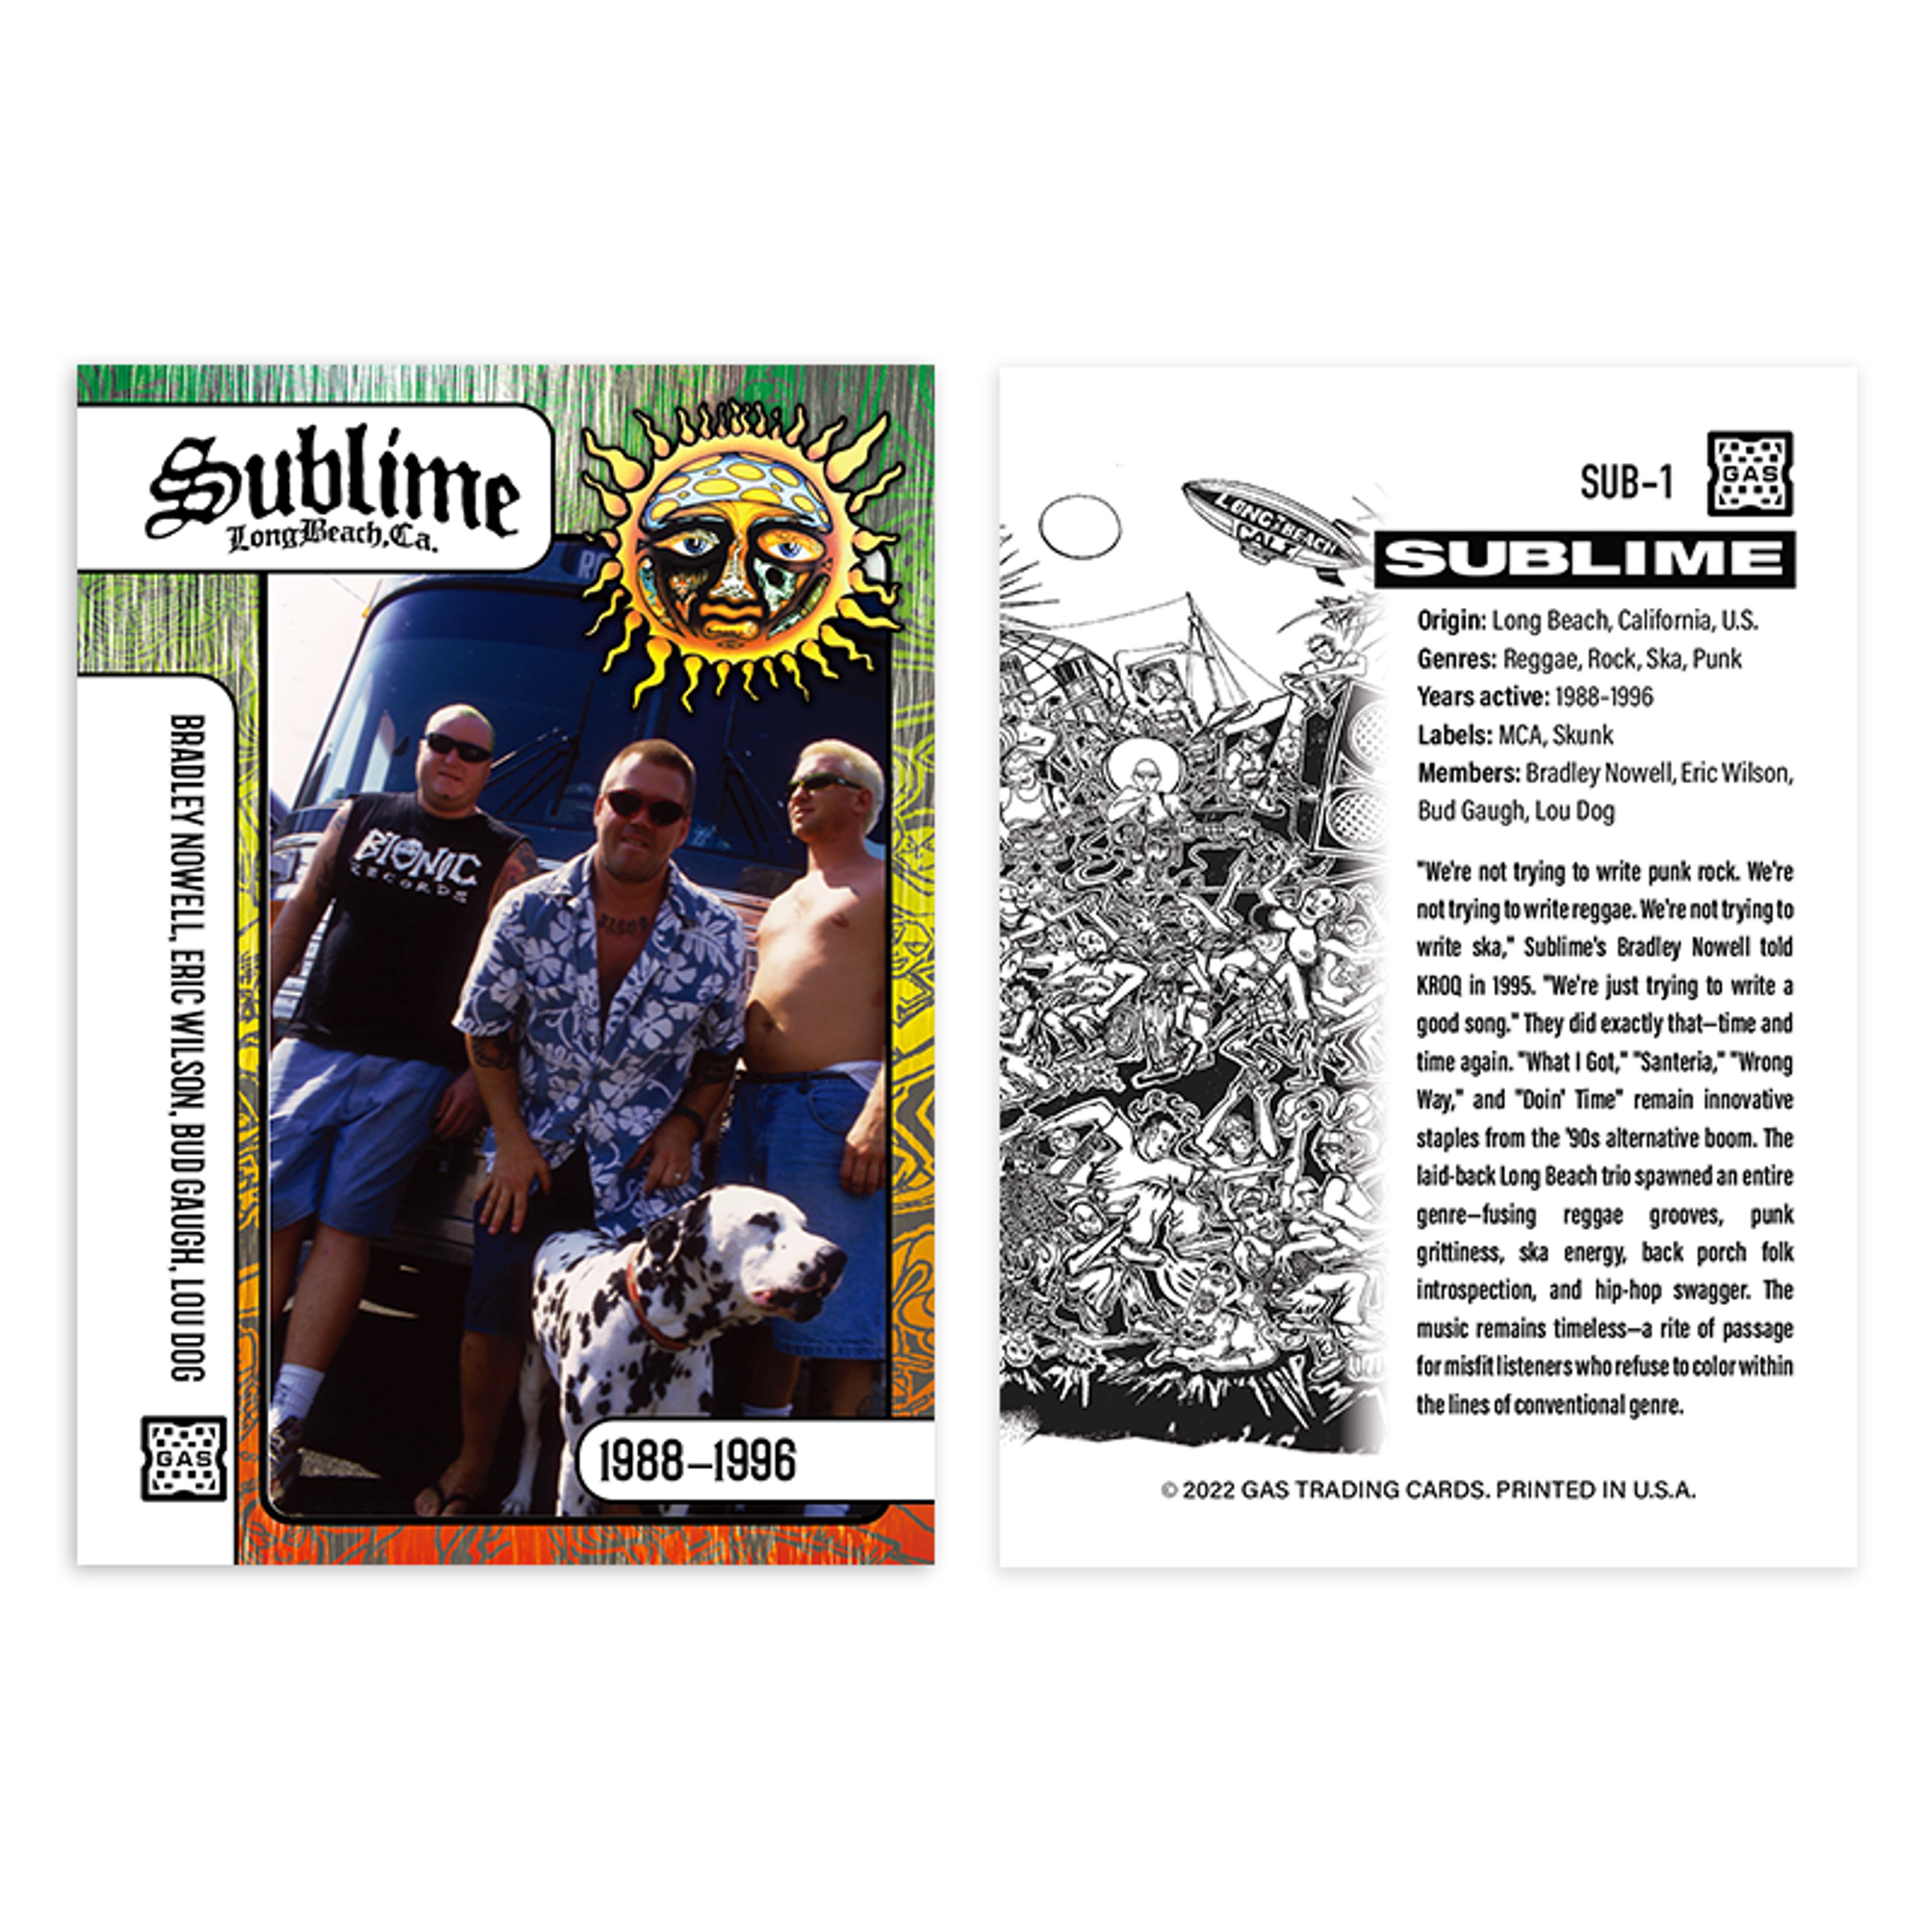 Alternate View 2 of The Official Sublime GAS Trading Card #1 Base Edition